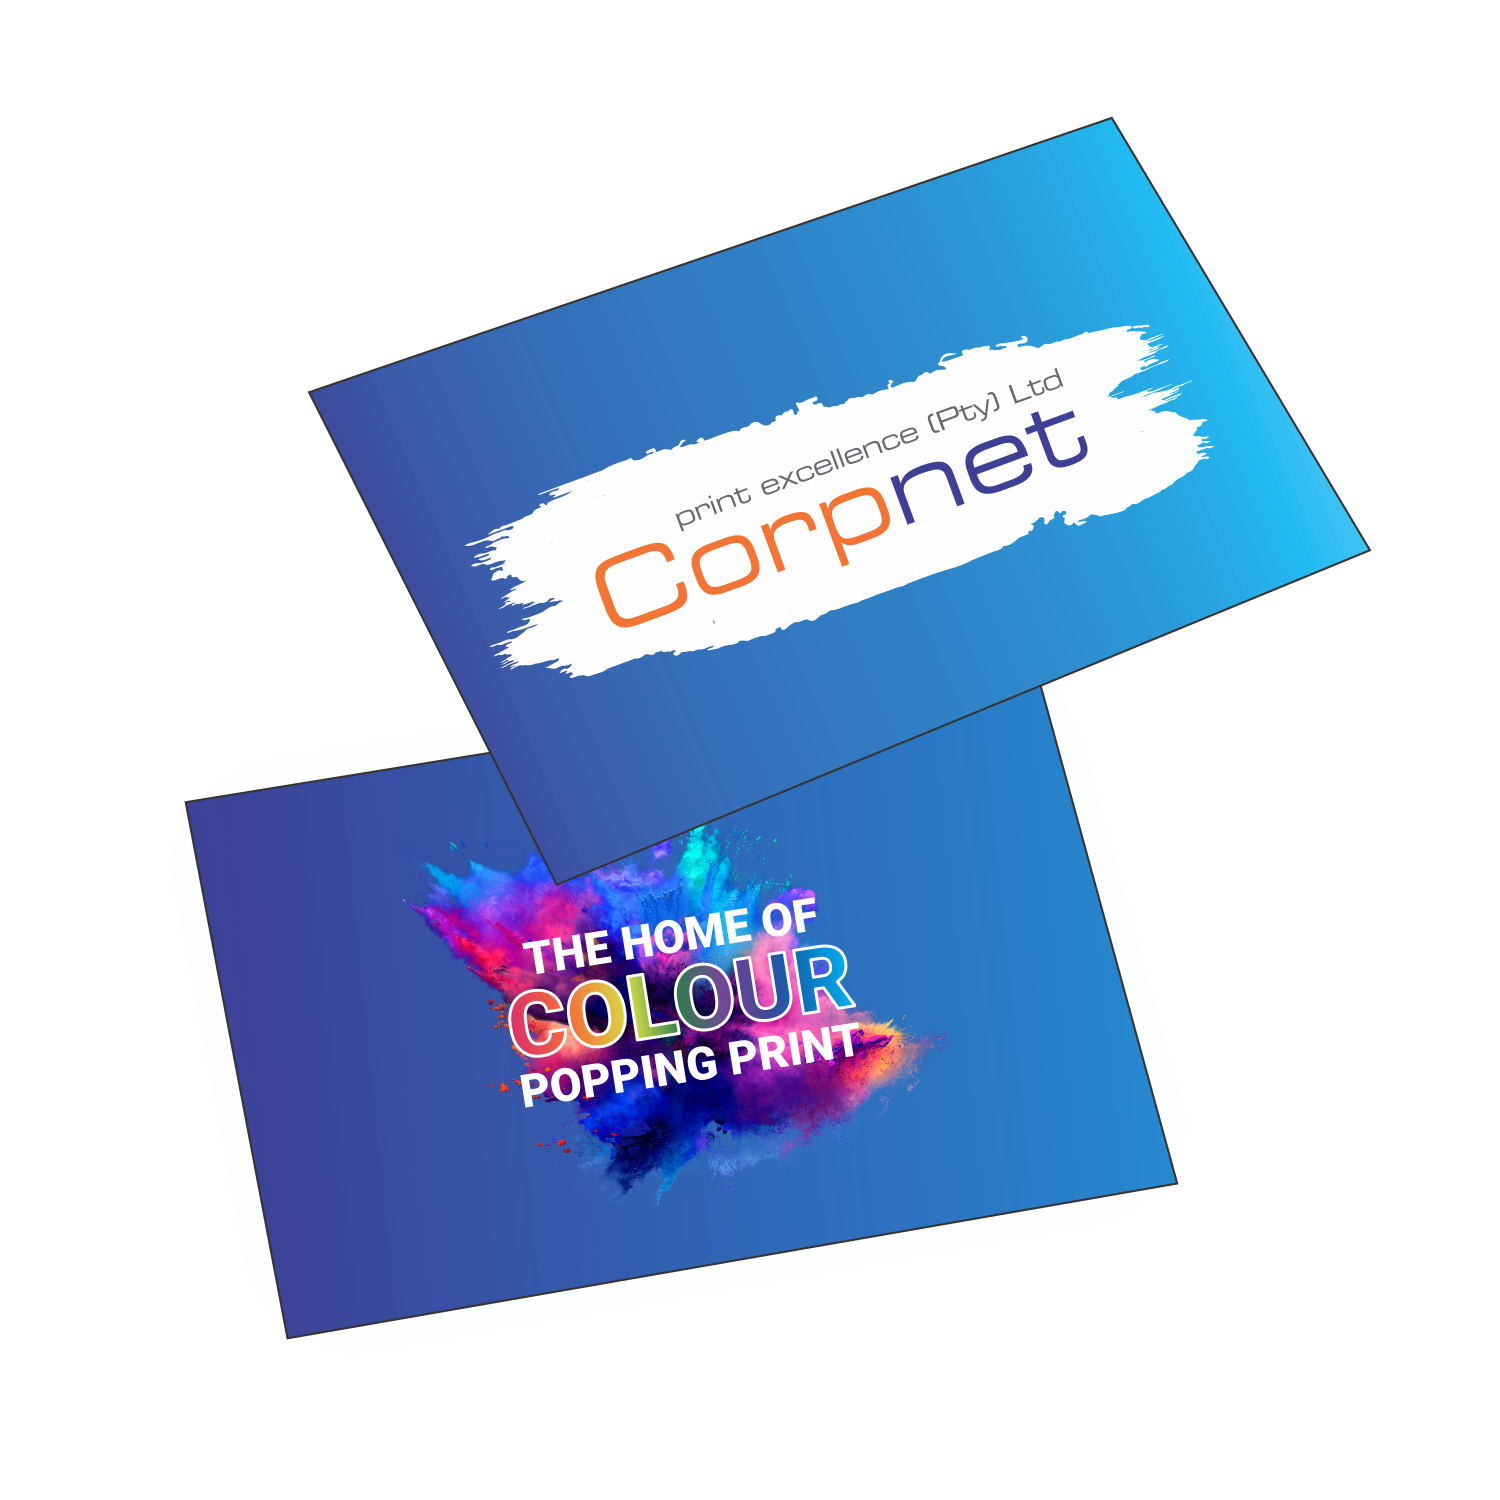 Business Cards - Crafted by Corpnet Print Excellence